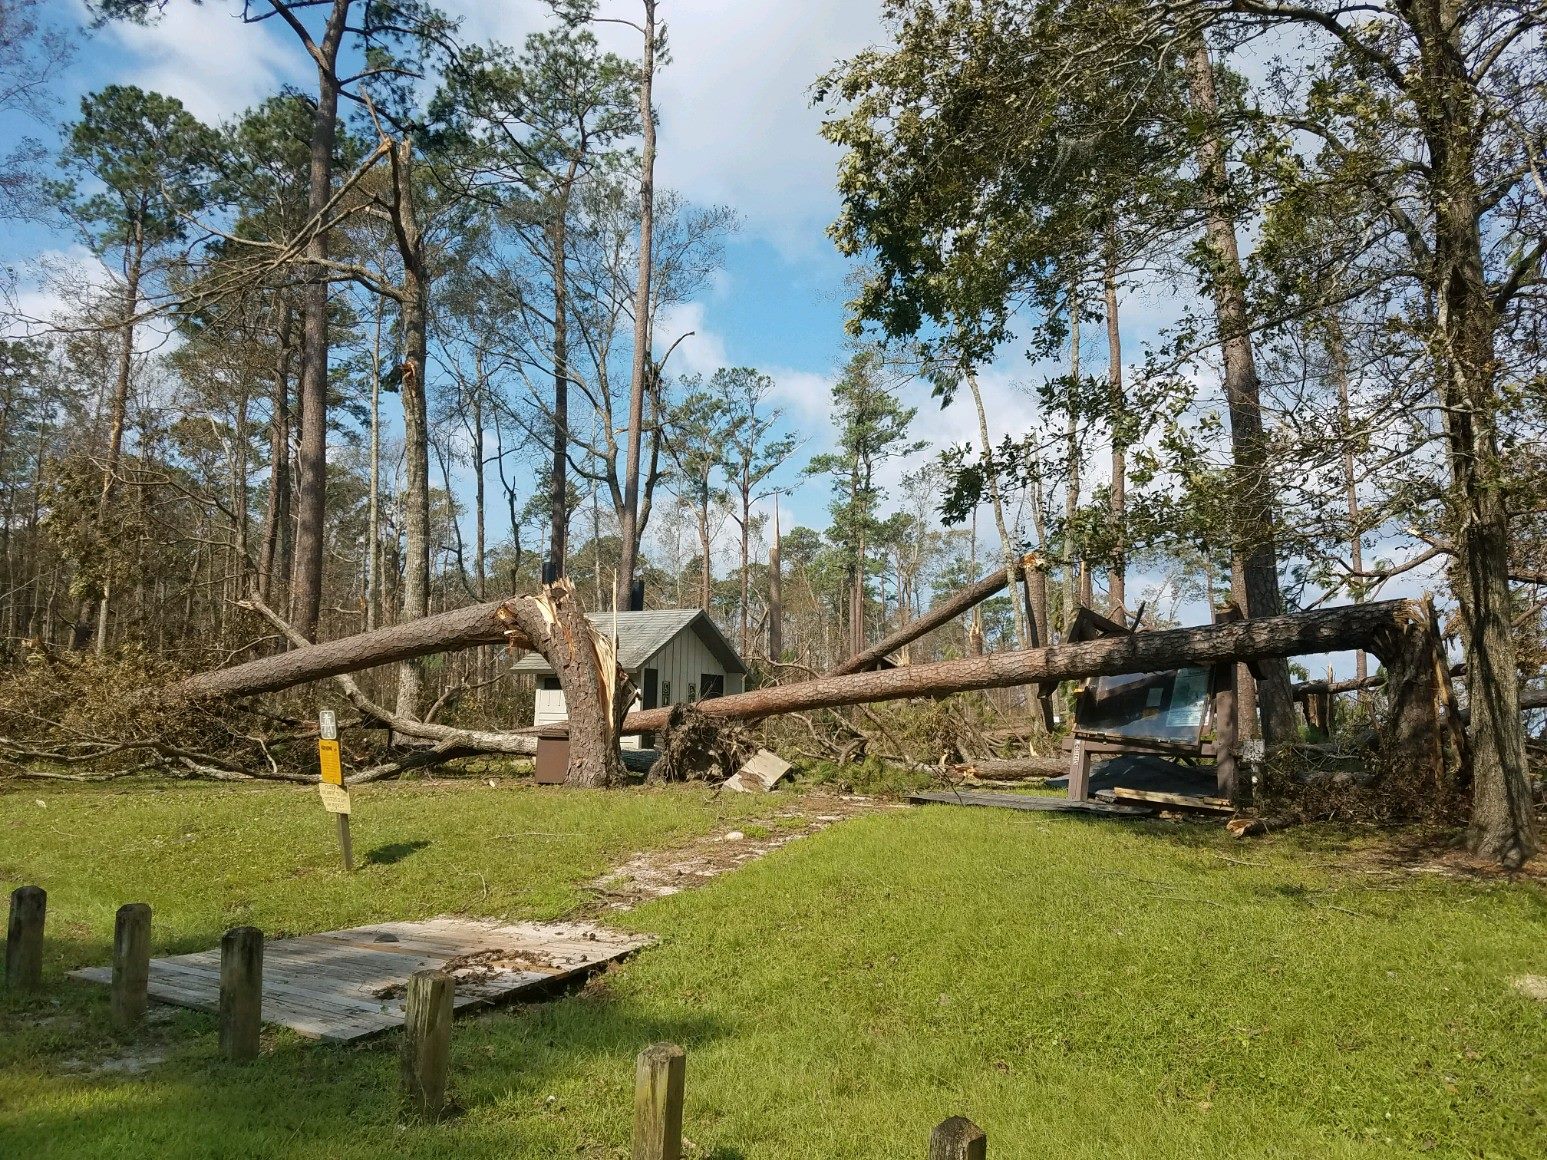 Croatan asks for feedback on storm damage repair project